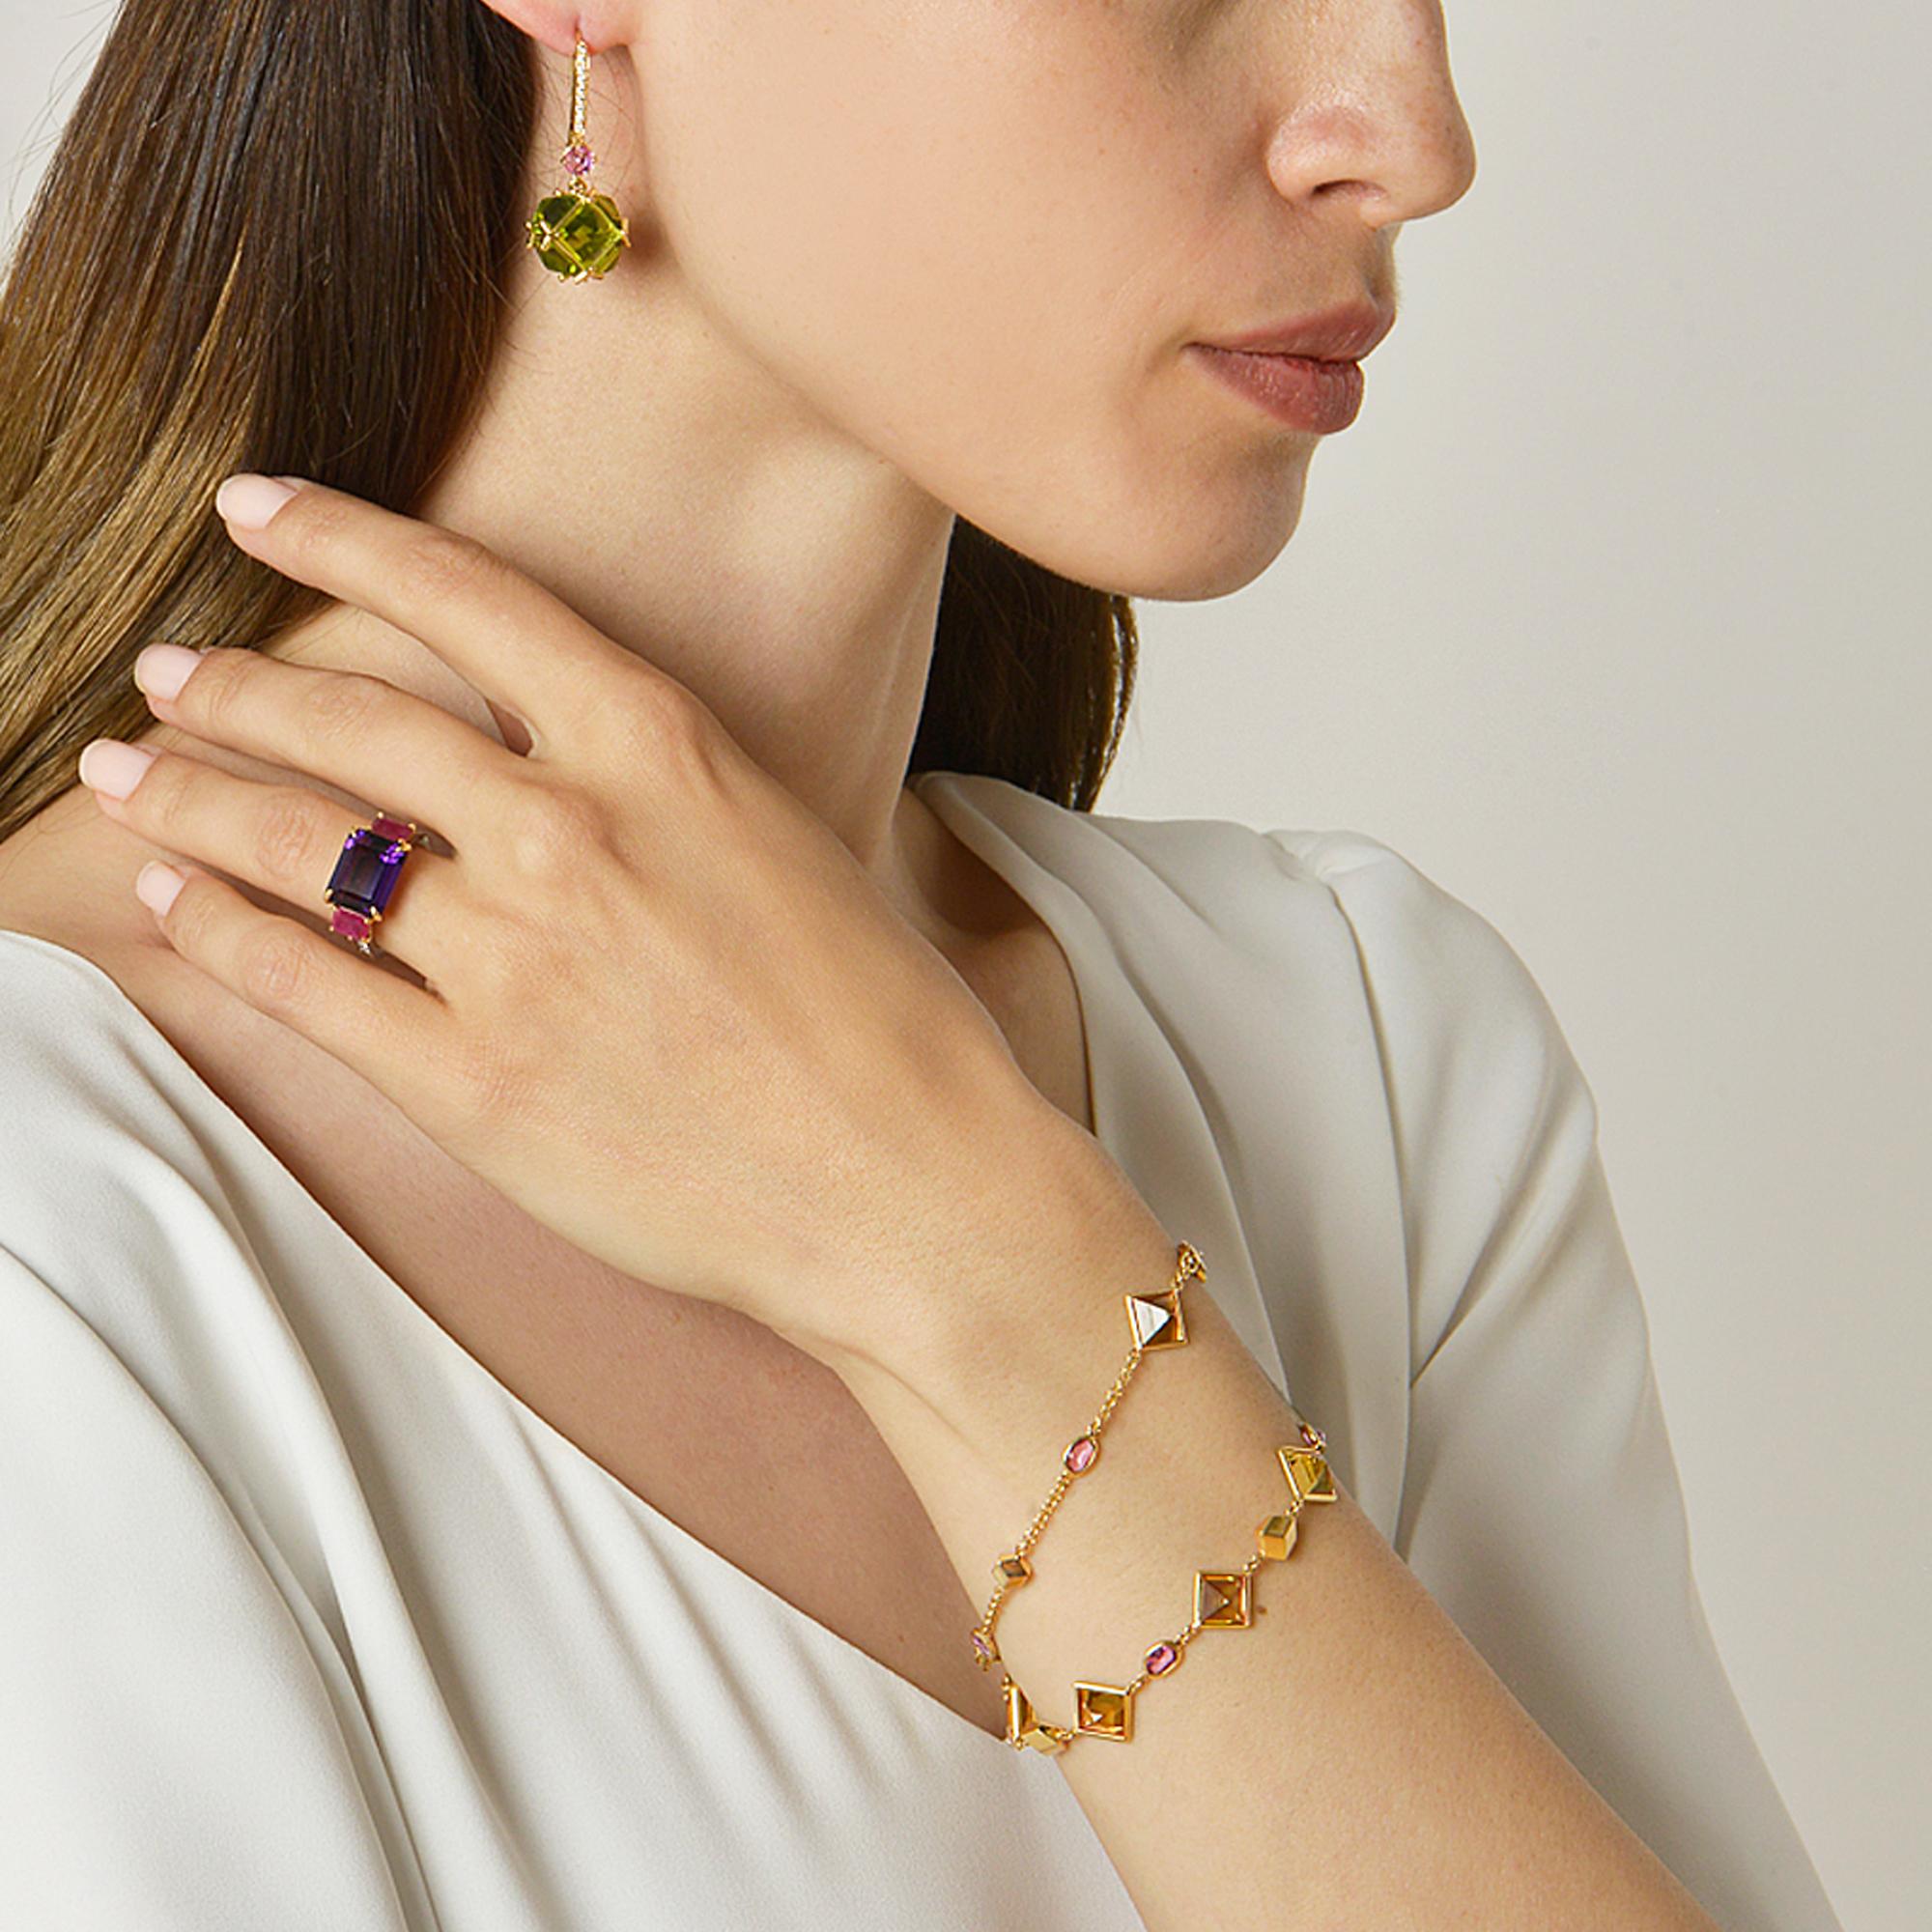 18kt yellow gold Florentine station bracelet with bezel set emerald-cut citrine and oval pink sapphires, and signature Brillante® detail.

Inspired by the Garden of the Iris, the Florentine collection pairs bold color combinations of geometric